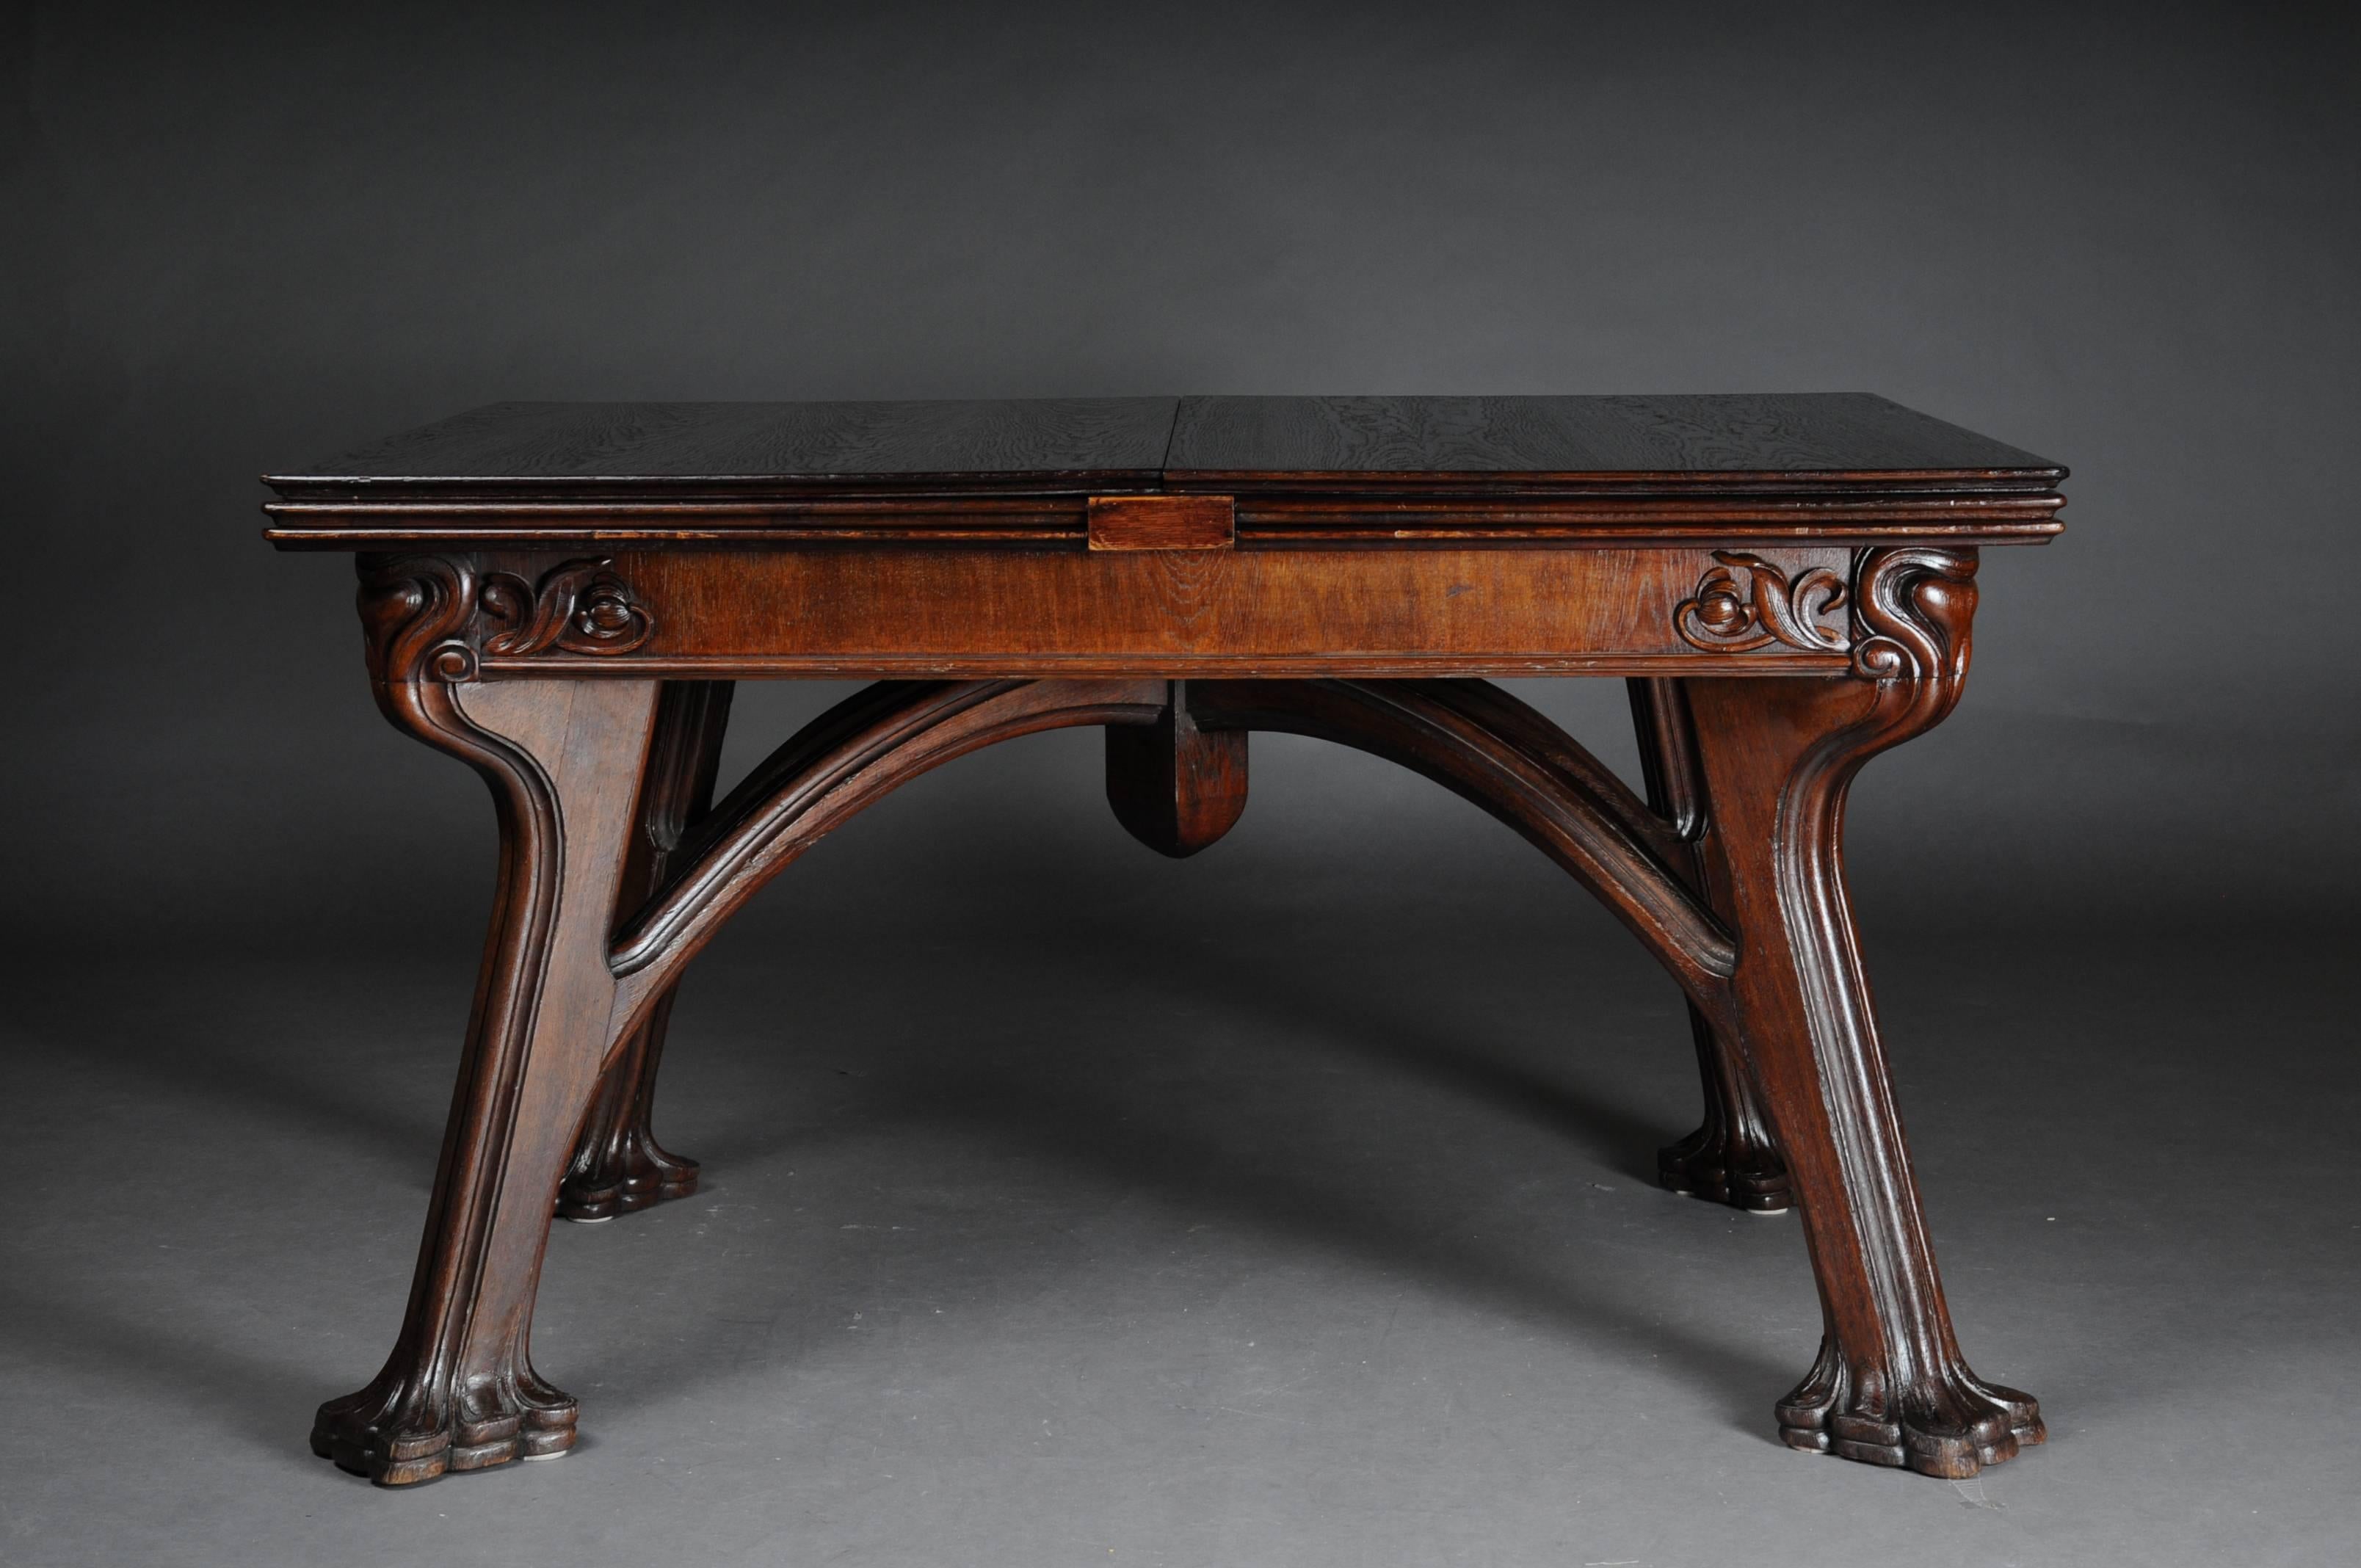 Probably Eugene Gaillard!
Solid oak hand-carved. Rectangular body on four straight legs. Table with impressive Art Nouveau elements. The table is extendable. This table is unique and an eyecatcher

Extended state:
Dimensions in cm: Length 386